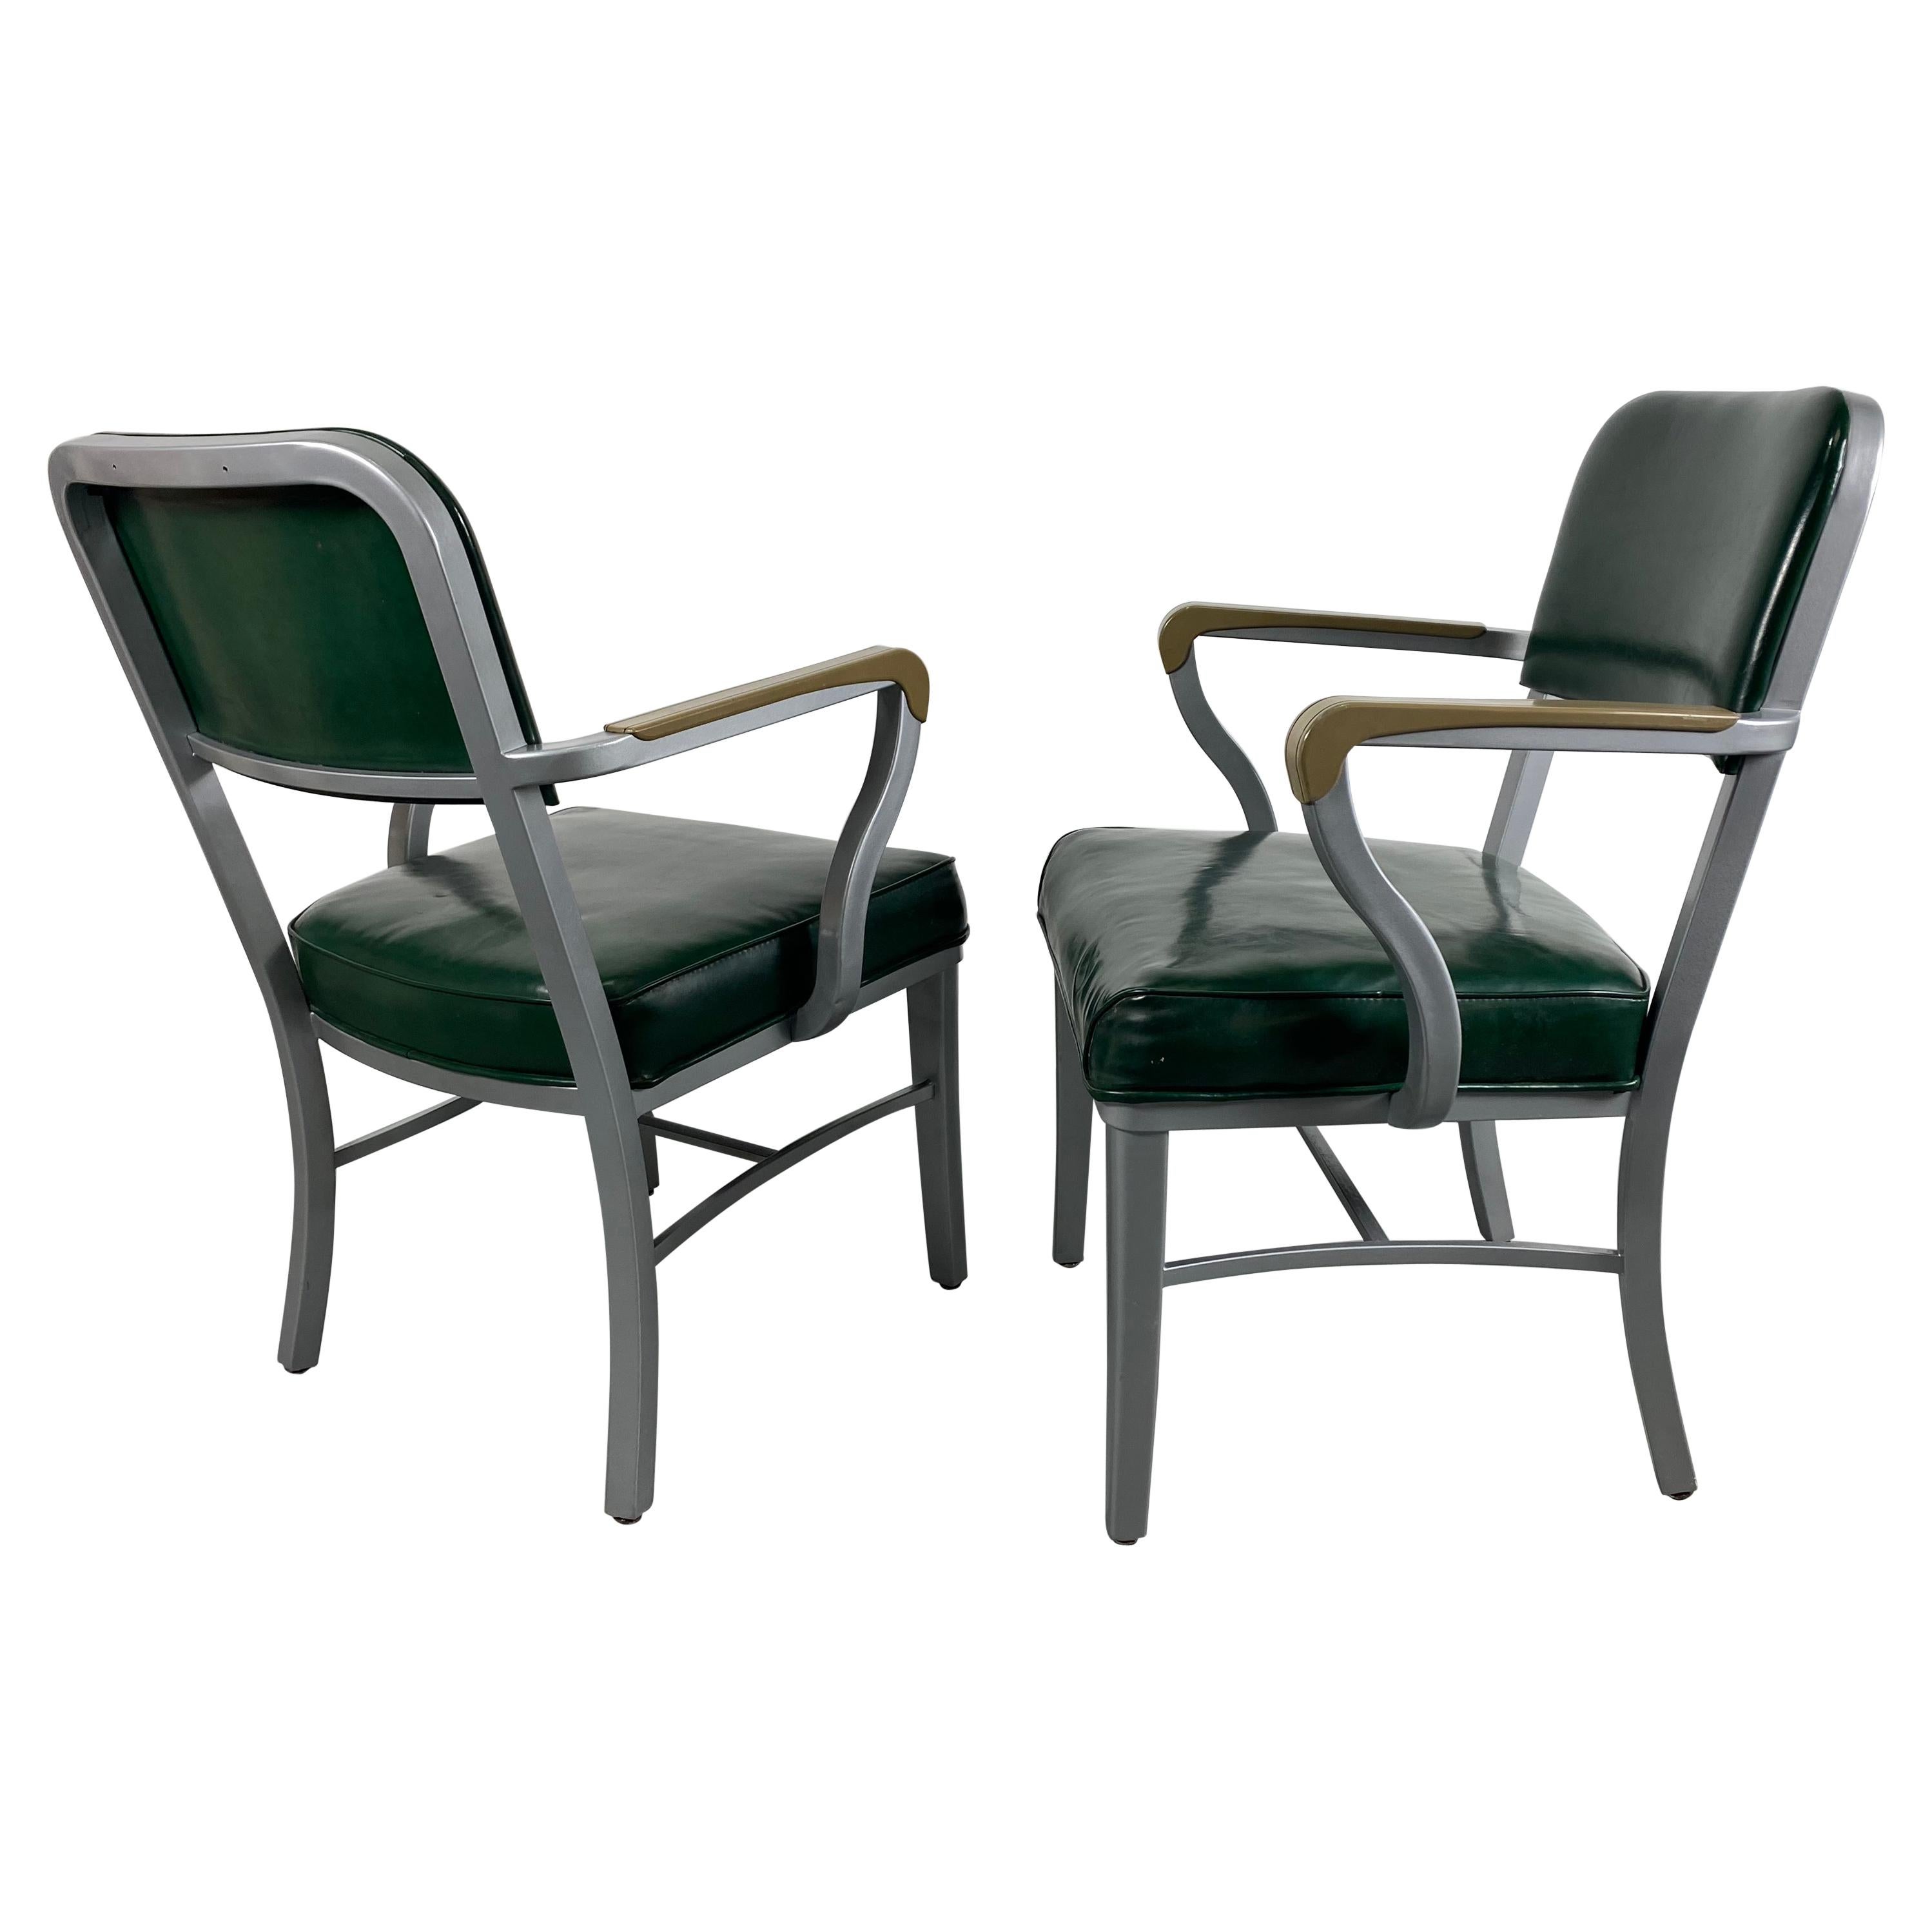 Classic Pair Grey Industrial Office Steel Tanker Arm Chairs by Steelcase